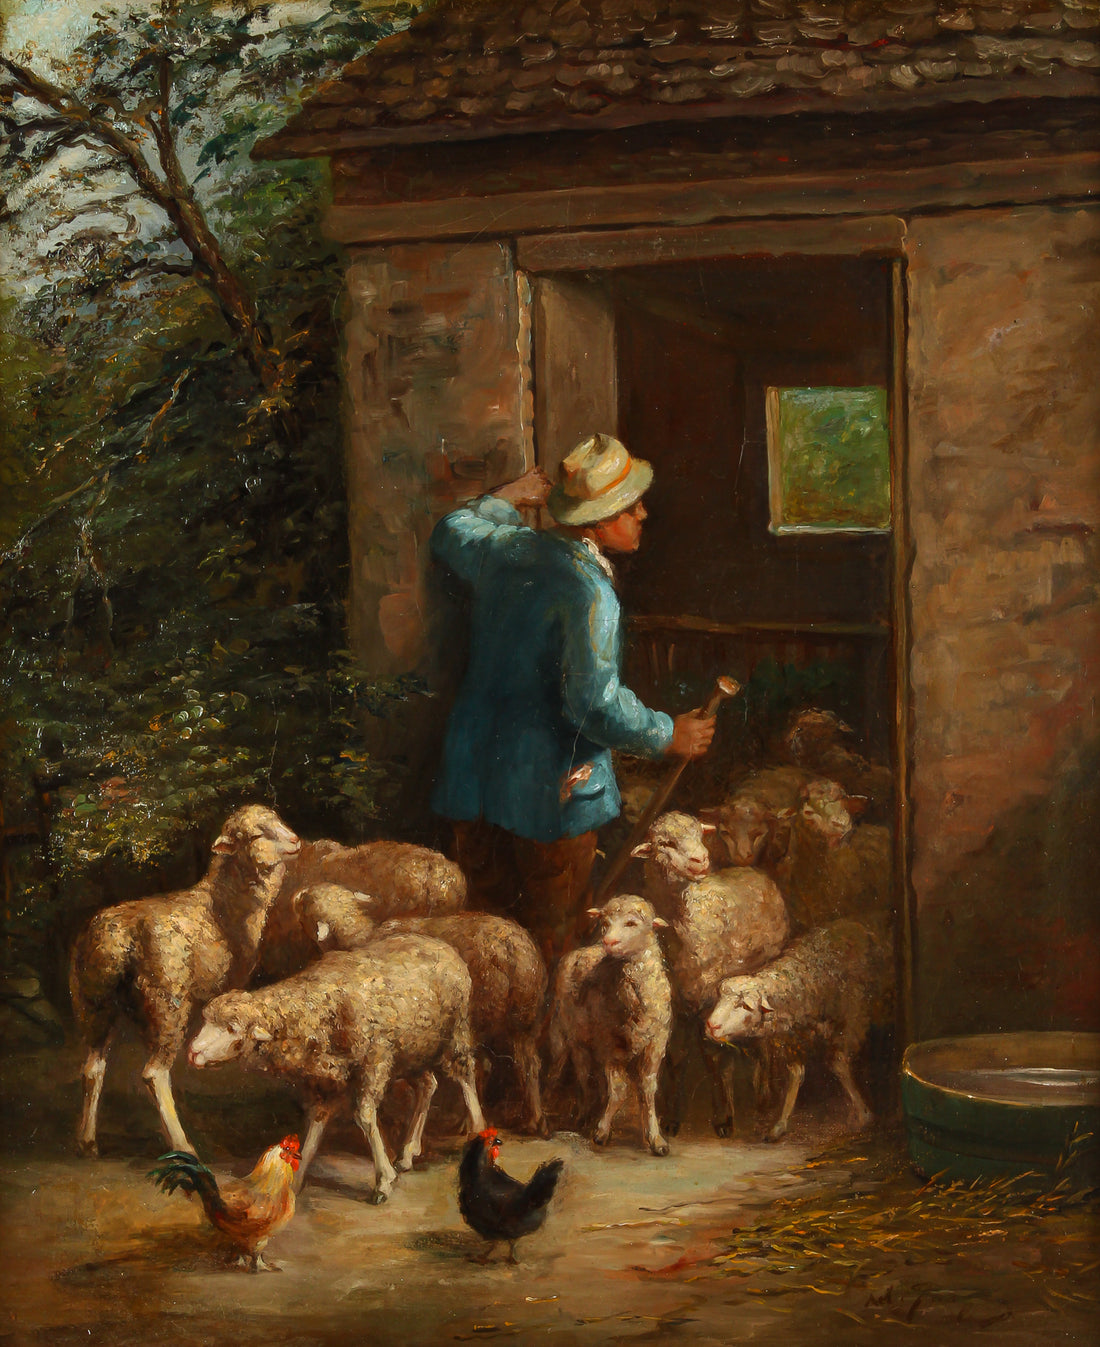 Attributed to Charles-Émile Jacque - "Shepherd and His Flock" - Oil on Canvas